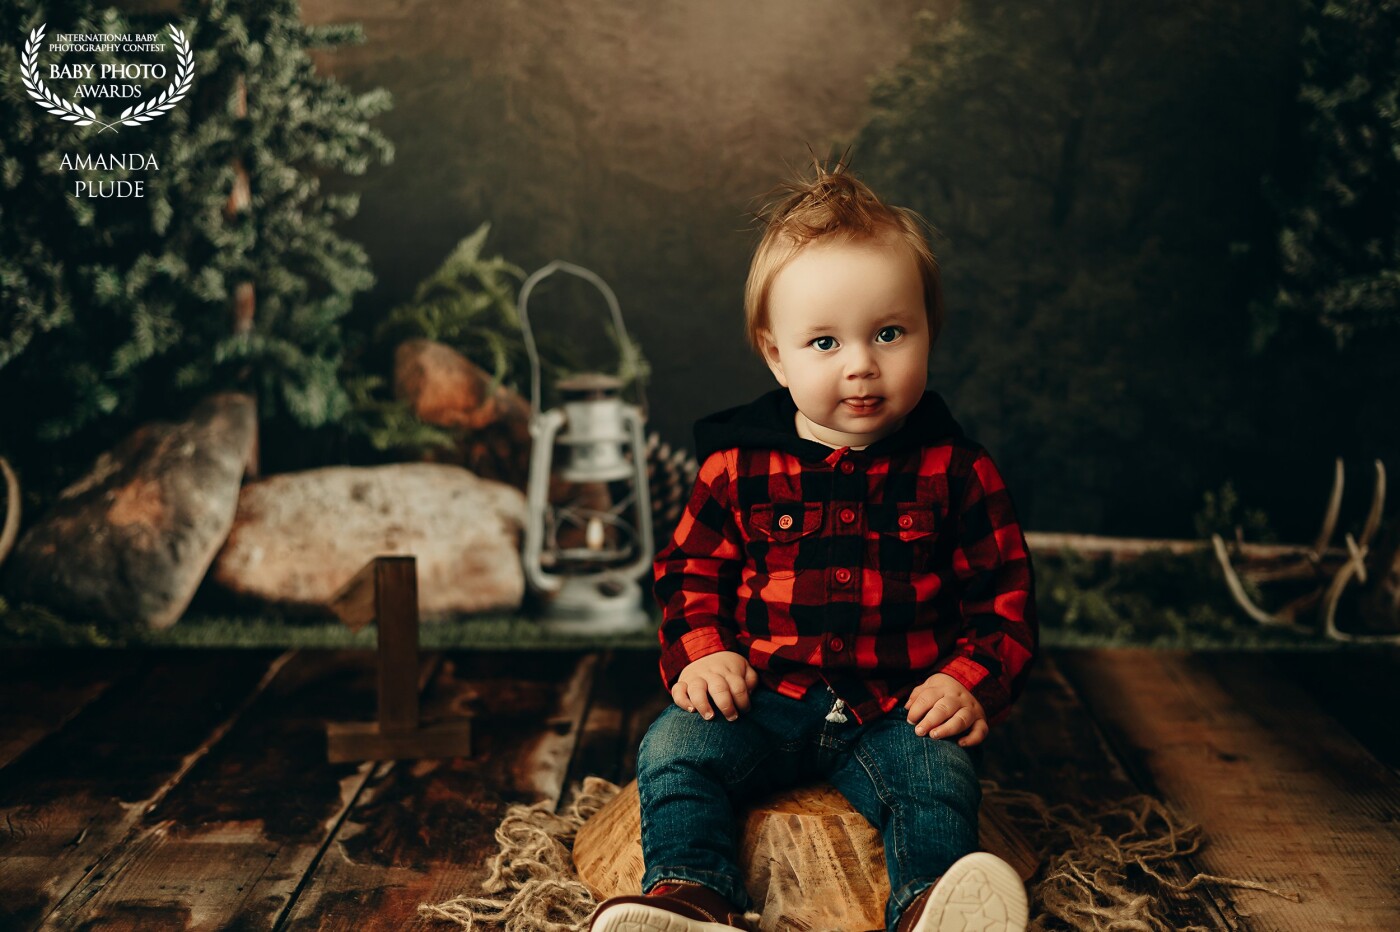 The cutest little lumberjack came to the studio to celebrate his first birthday! Mama brought in a cake decorated as a stump to compliment his perfect buffalo plaid shirt.